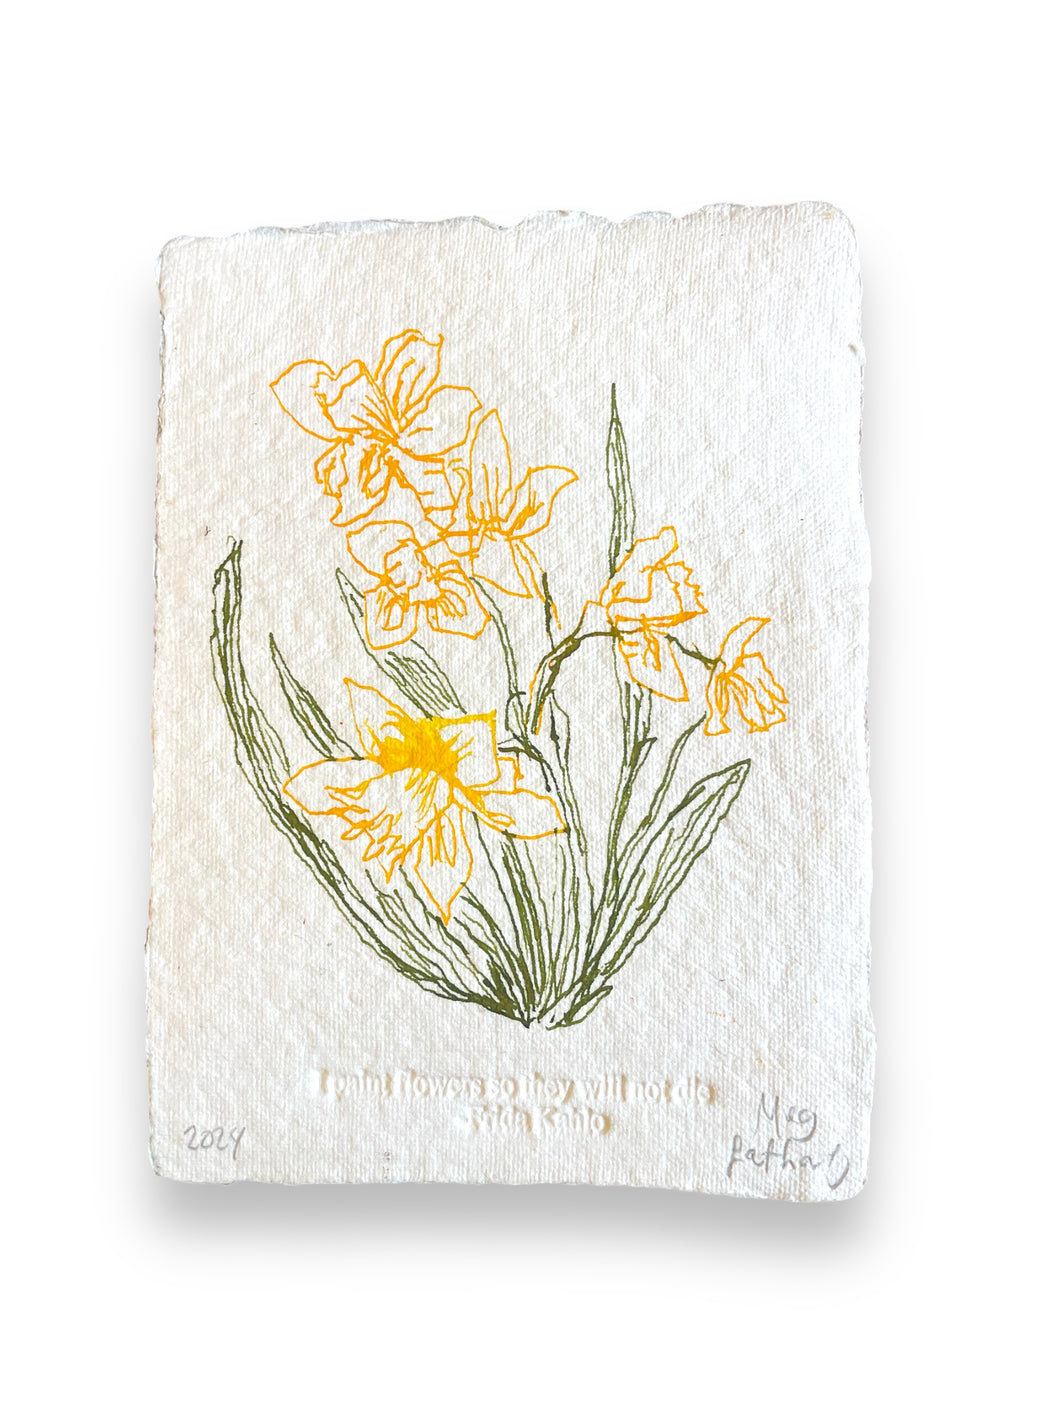 Original Daffodil Drawing and Embossing ‘I paint flowers so they will not die’ - Frida Kahlo